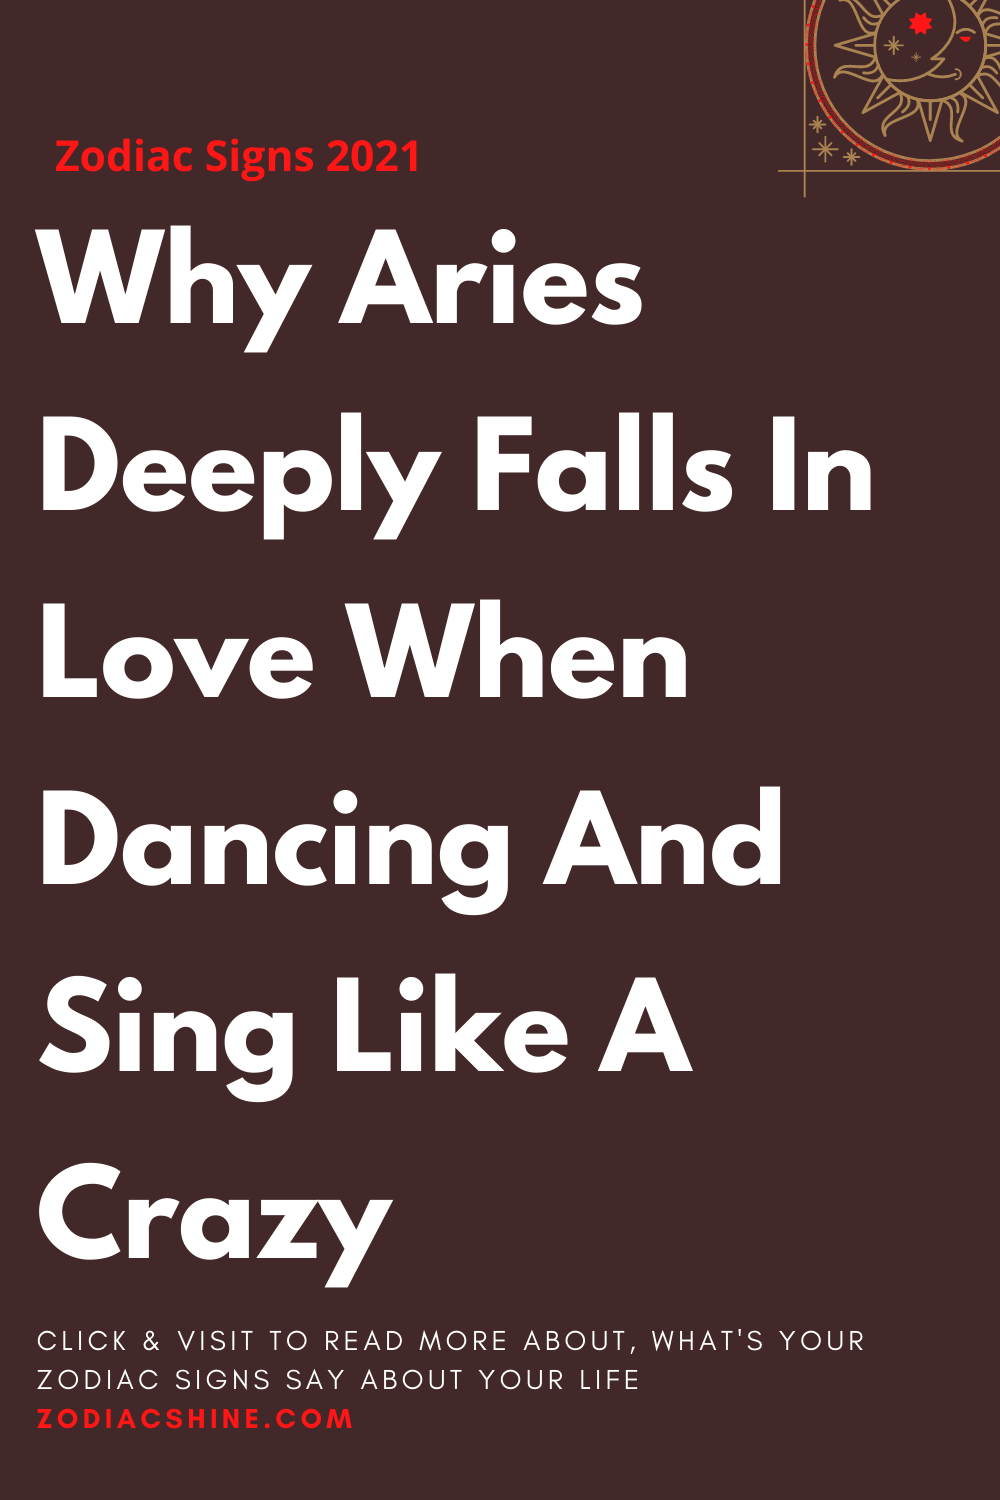 Why Aries Deeply Falls In Love When Dancing And Sing Like A Crazy